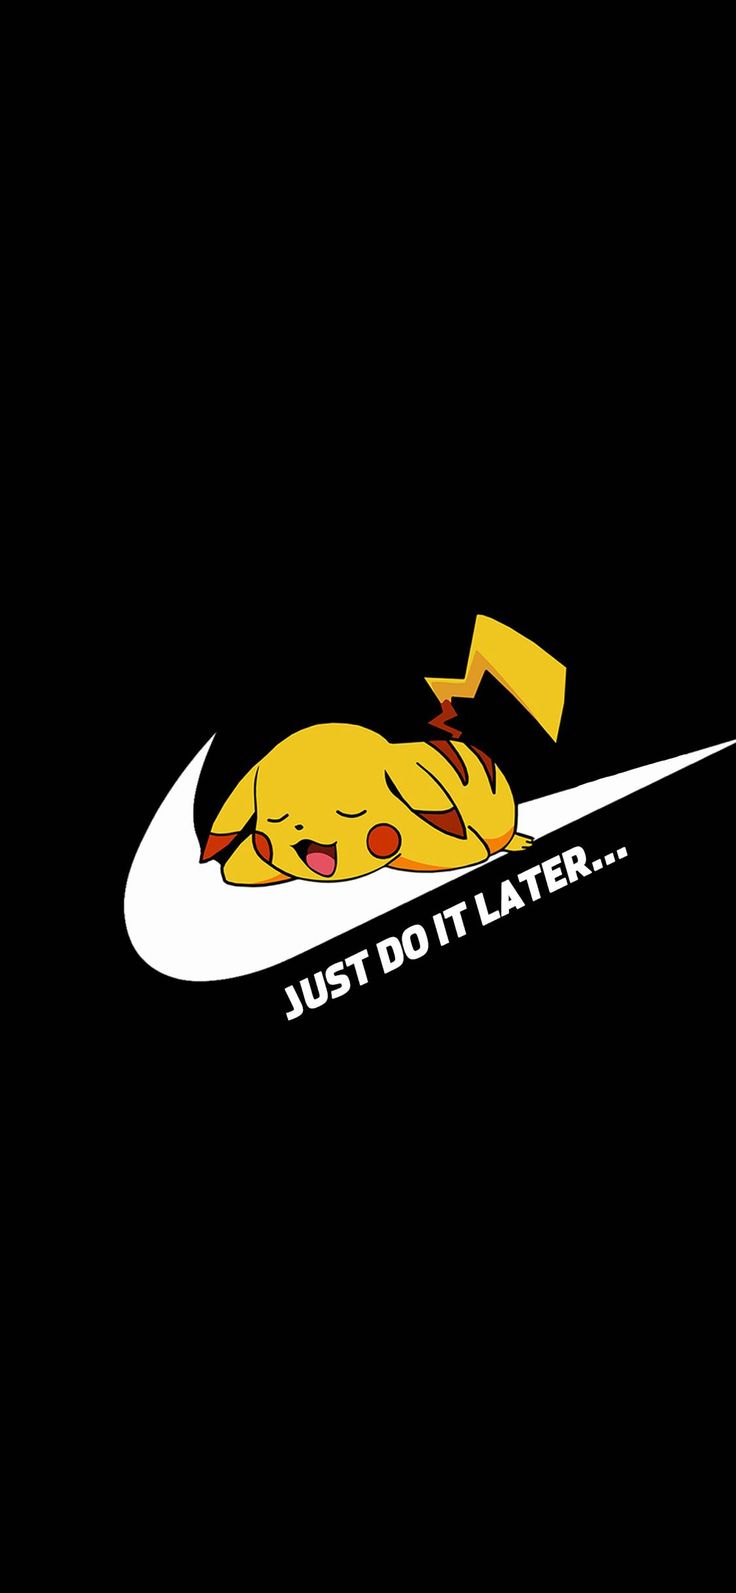 Cartoon skin blocks grave Nike Logo Just Do It Wallpaper for iPhone X, iPhone XS and iPhone XS. Just do it wallpaper, Pikachu wallpaper iphone, iPhone wallpaper